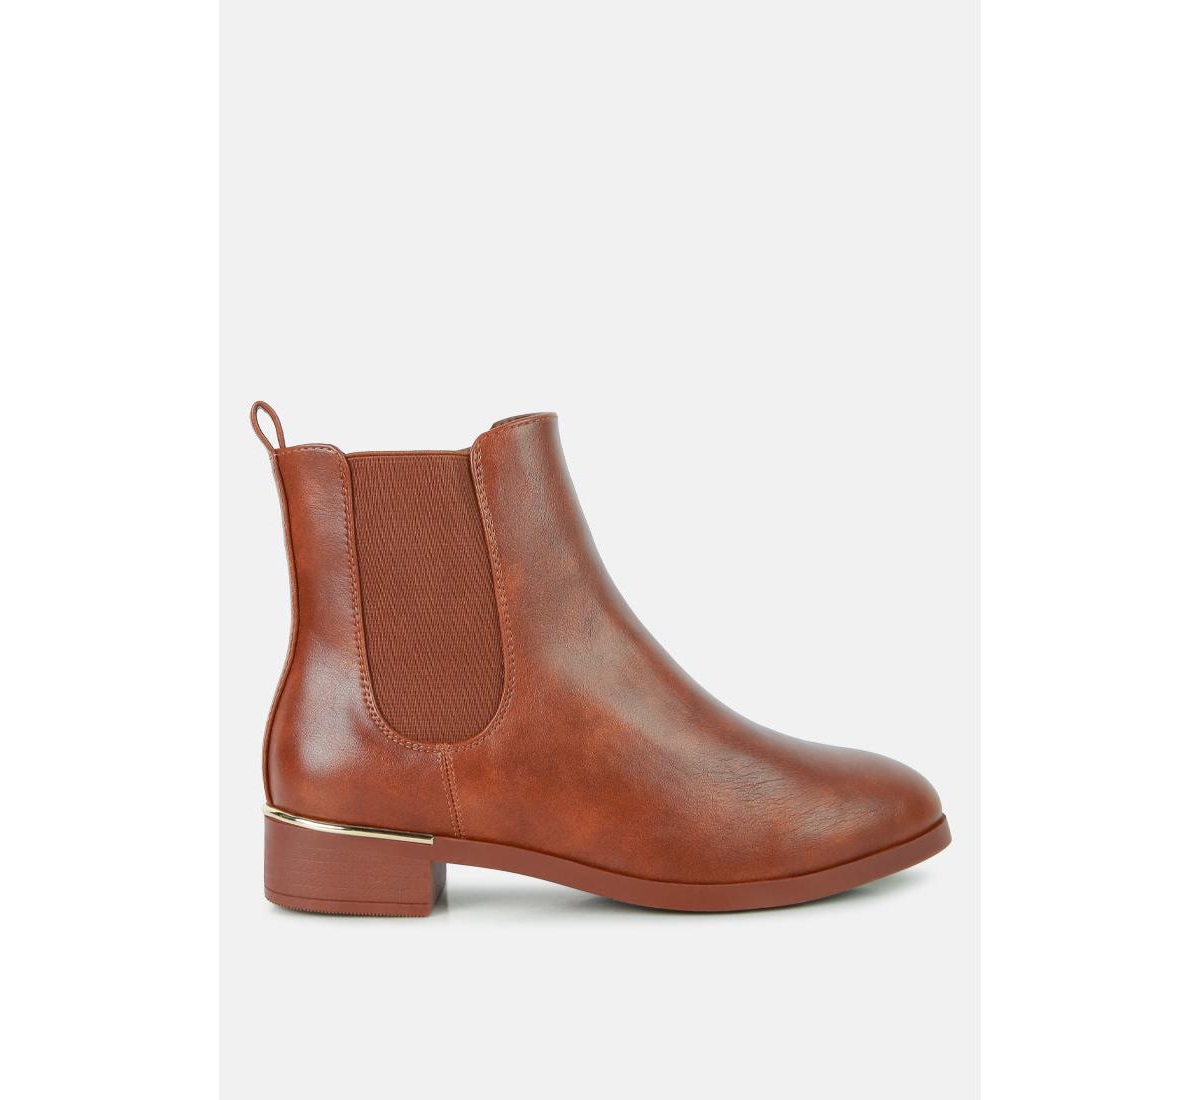 yacht winter basic ankle boots - Brown